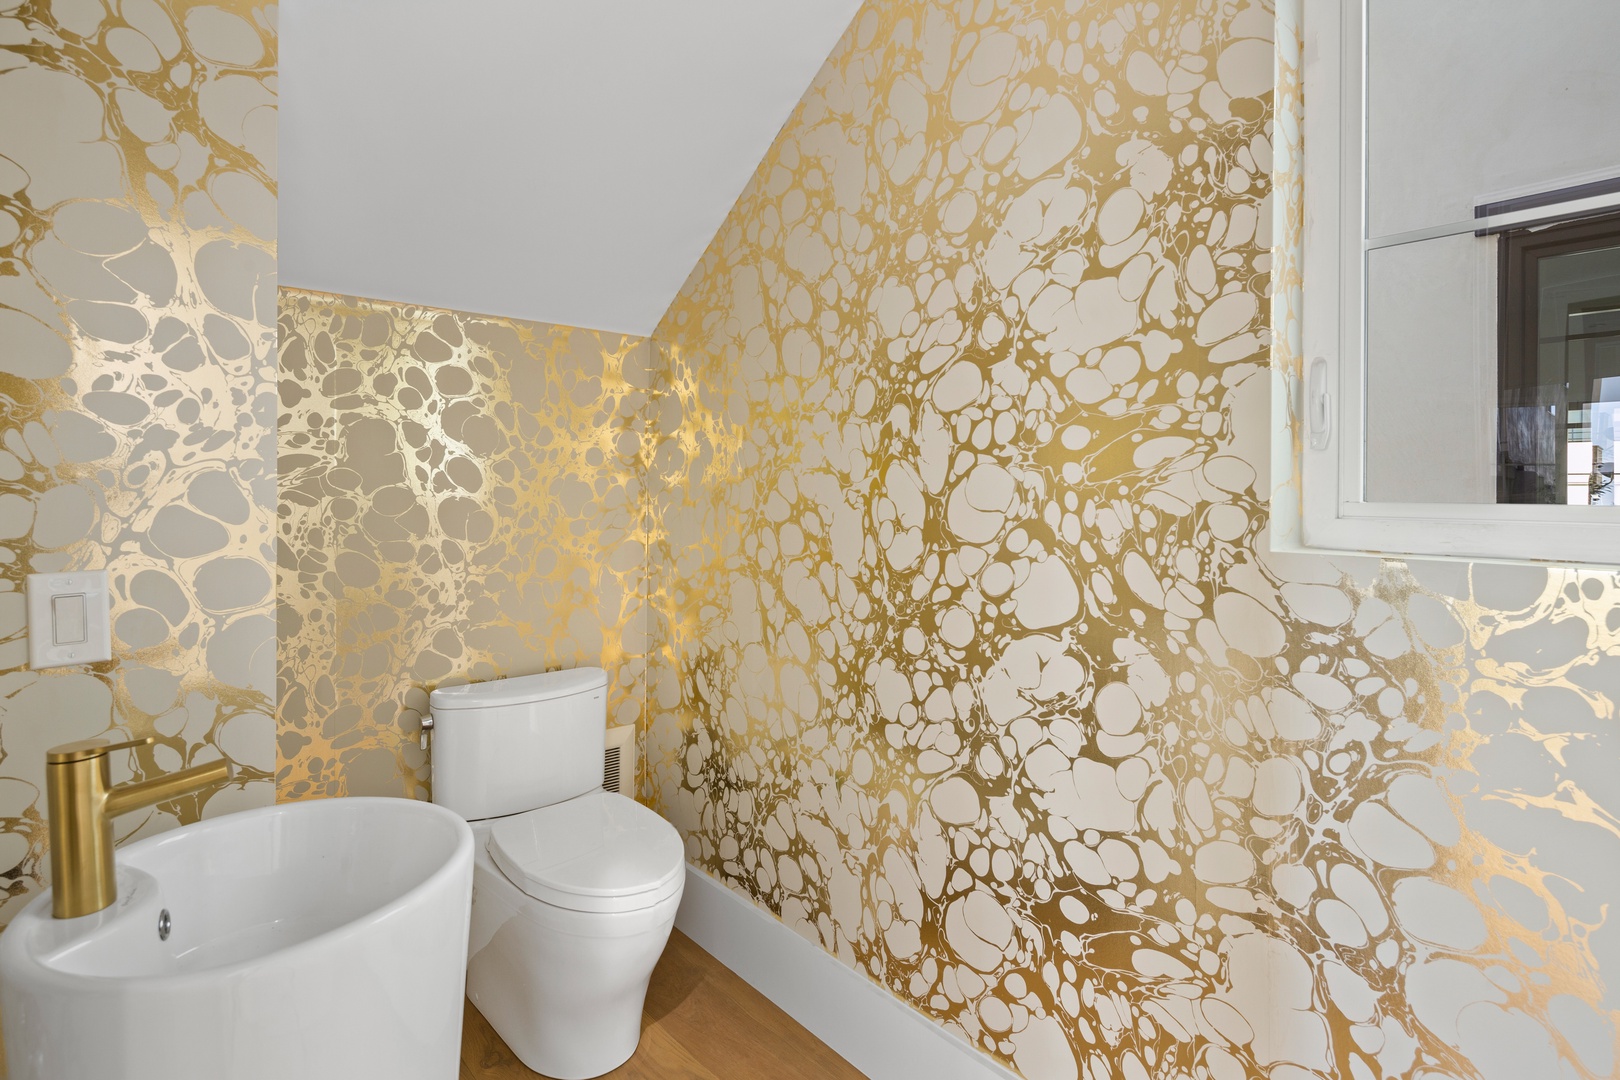 A chic powder room is available on the first floor